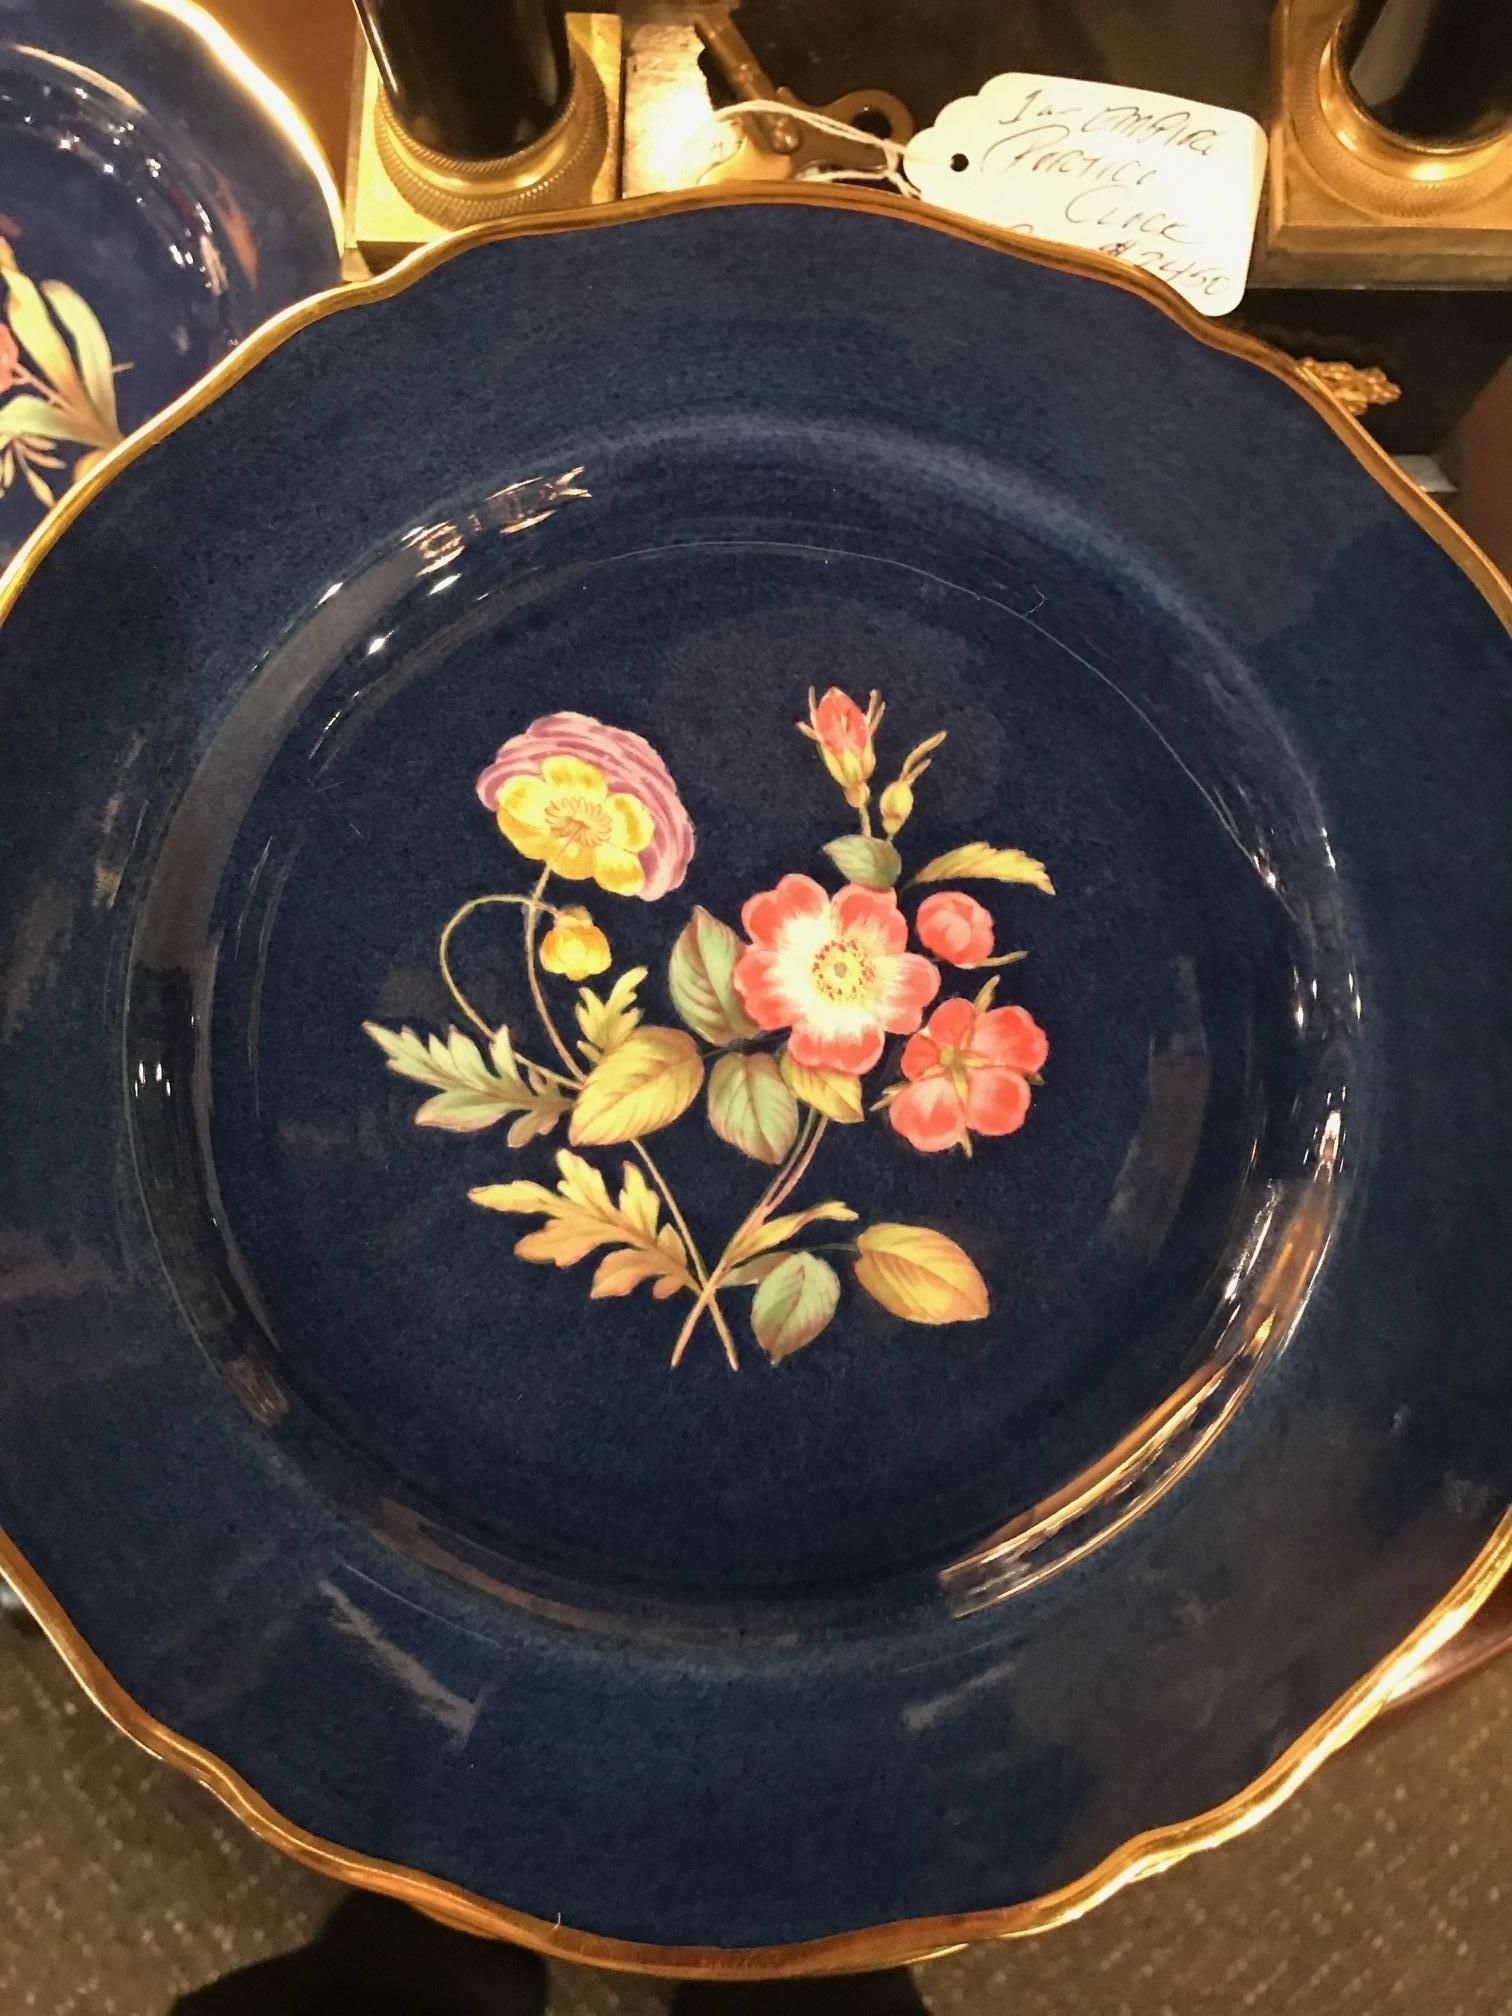 12 cobalt background botanical plates made by Spode Copeland. Each plate is a different hand-painted botanical with the name of the flower identified on the back. Simple gold band around the scalloped edge. Rich color sets off the beautifully